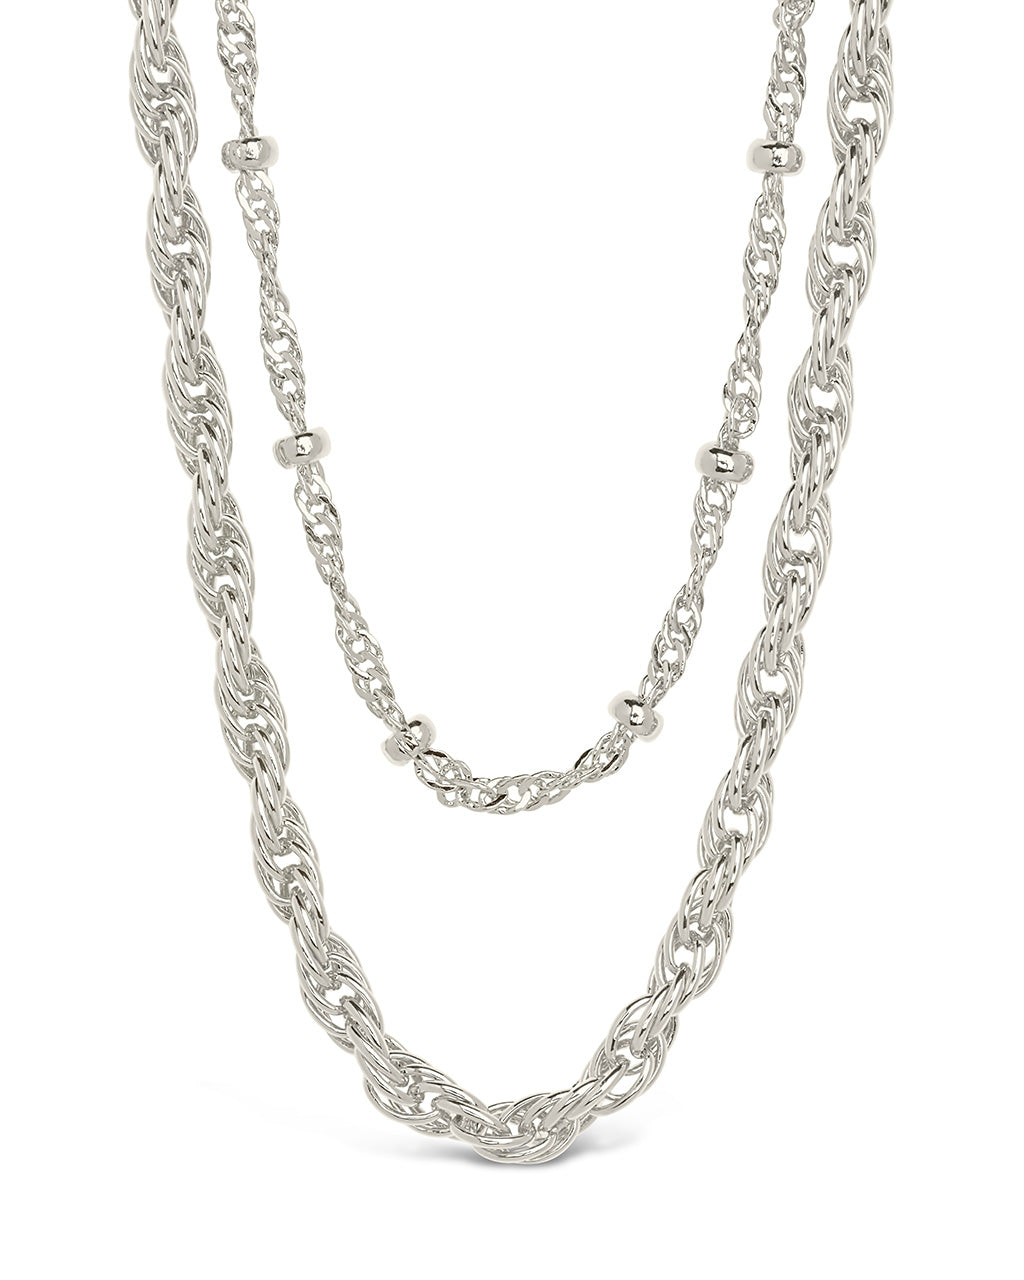 Raya Layered Chain Necklace Necklace Sterling Forever Silver 